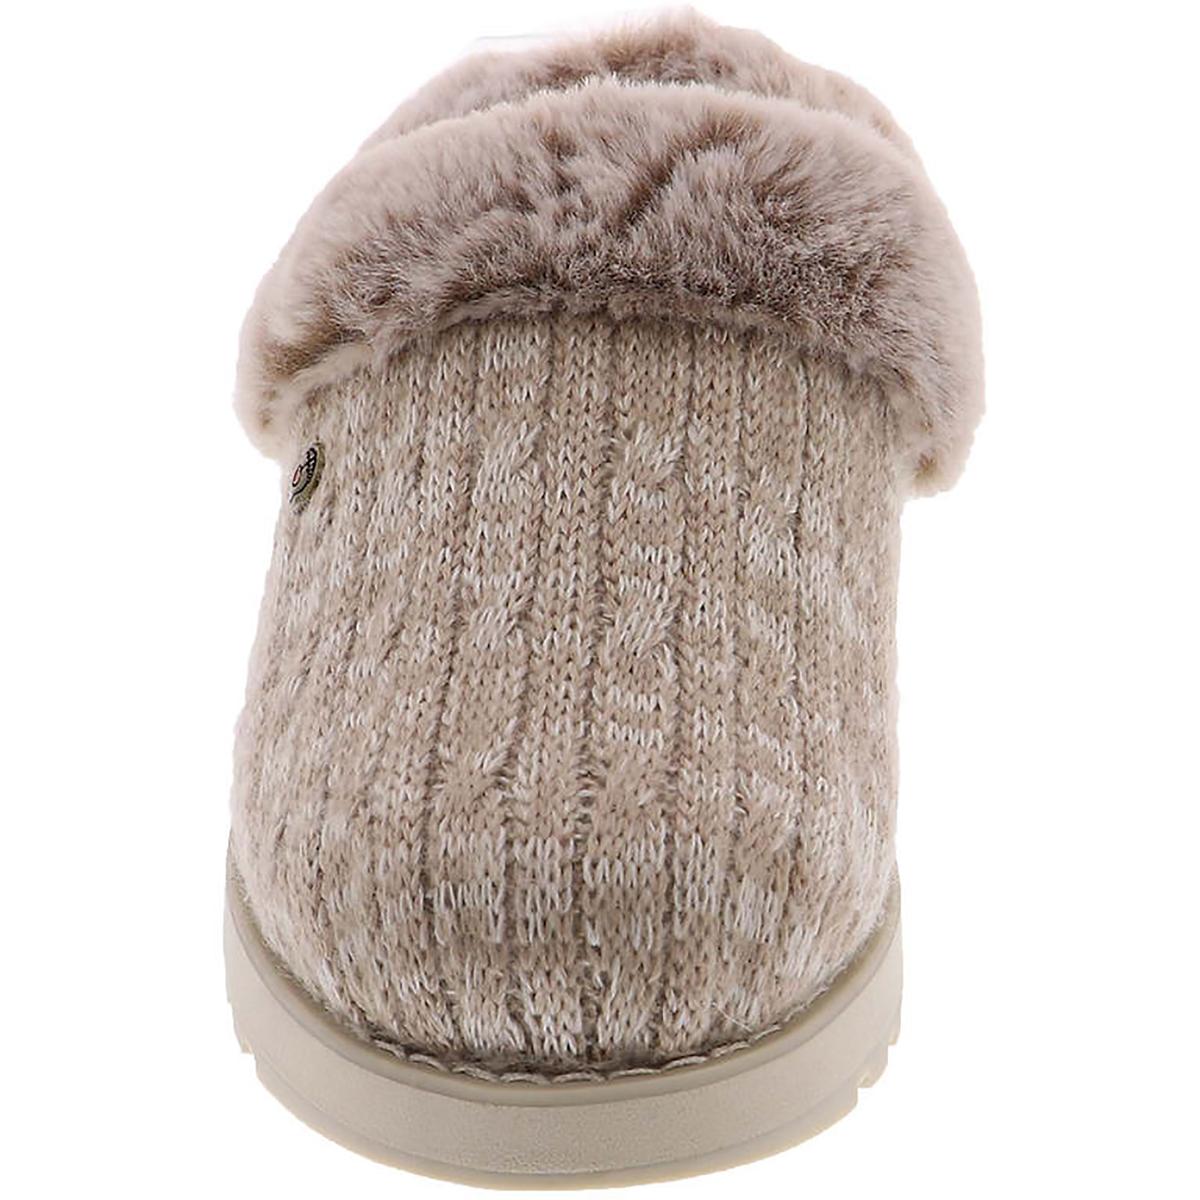 Skechers Keepsakes Ice Angel Womens Cable Knit Faux Fur Clog Slippers